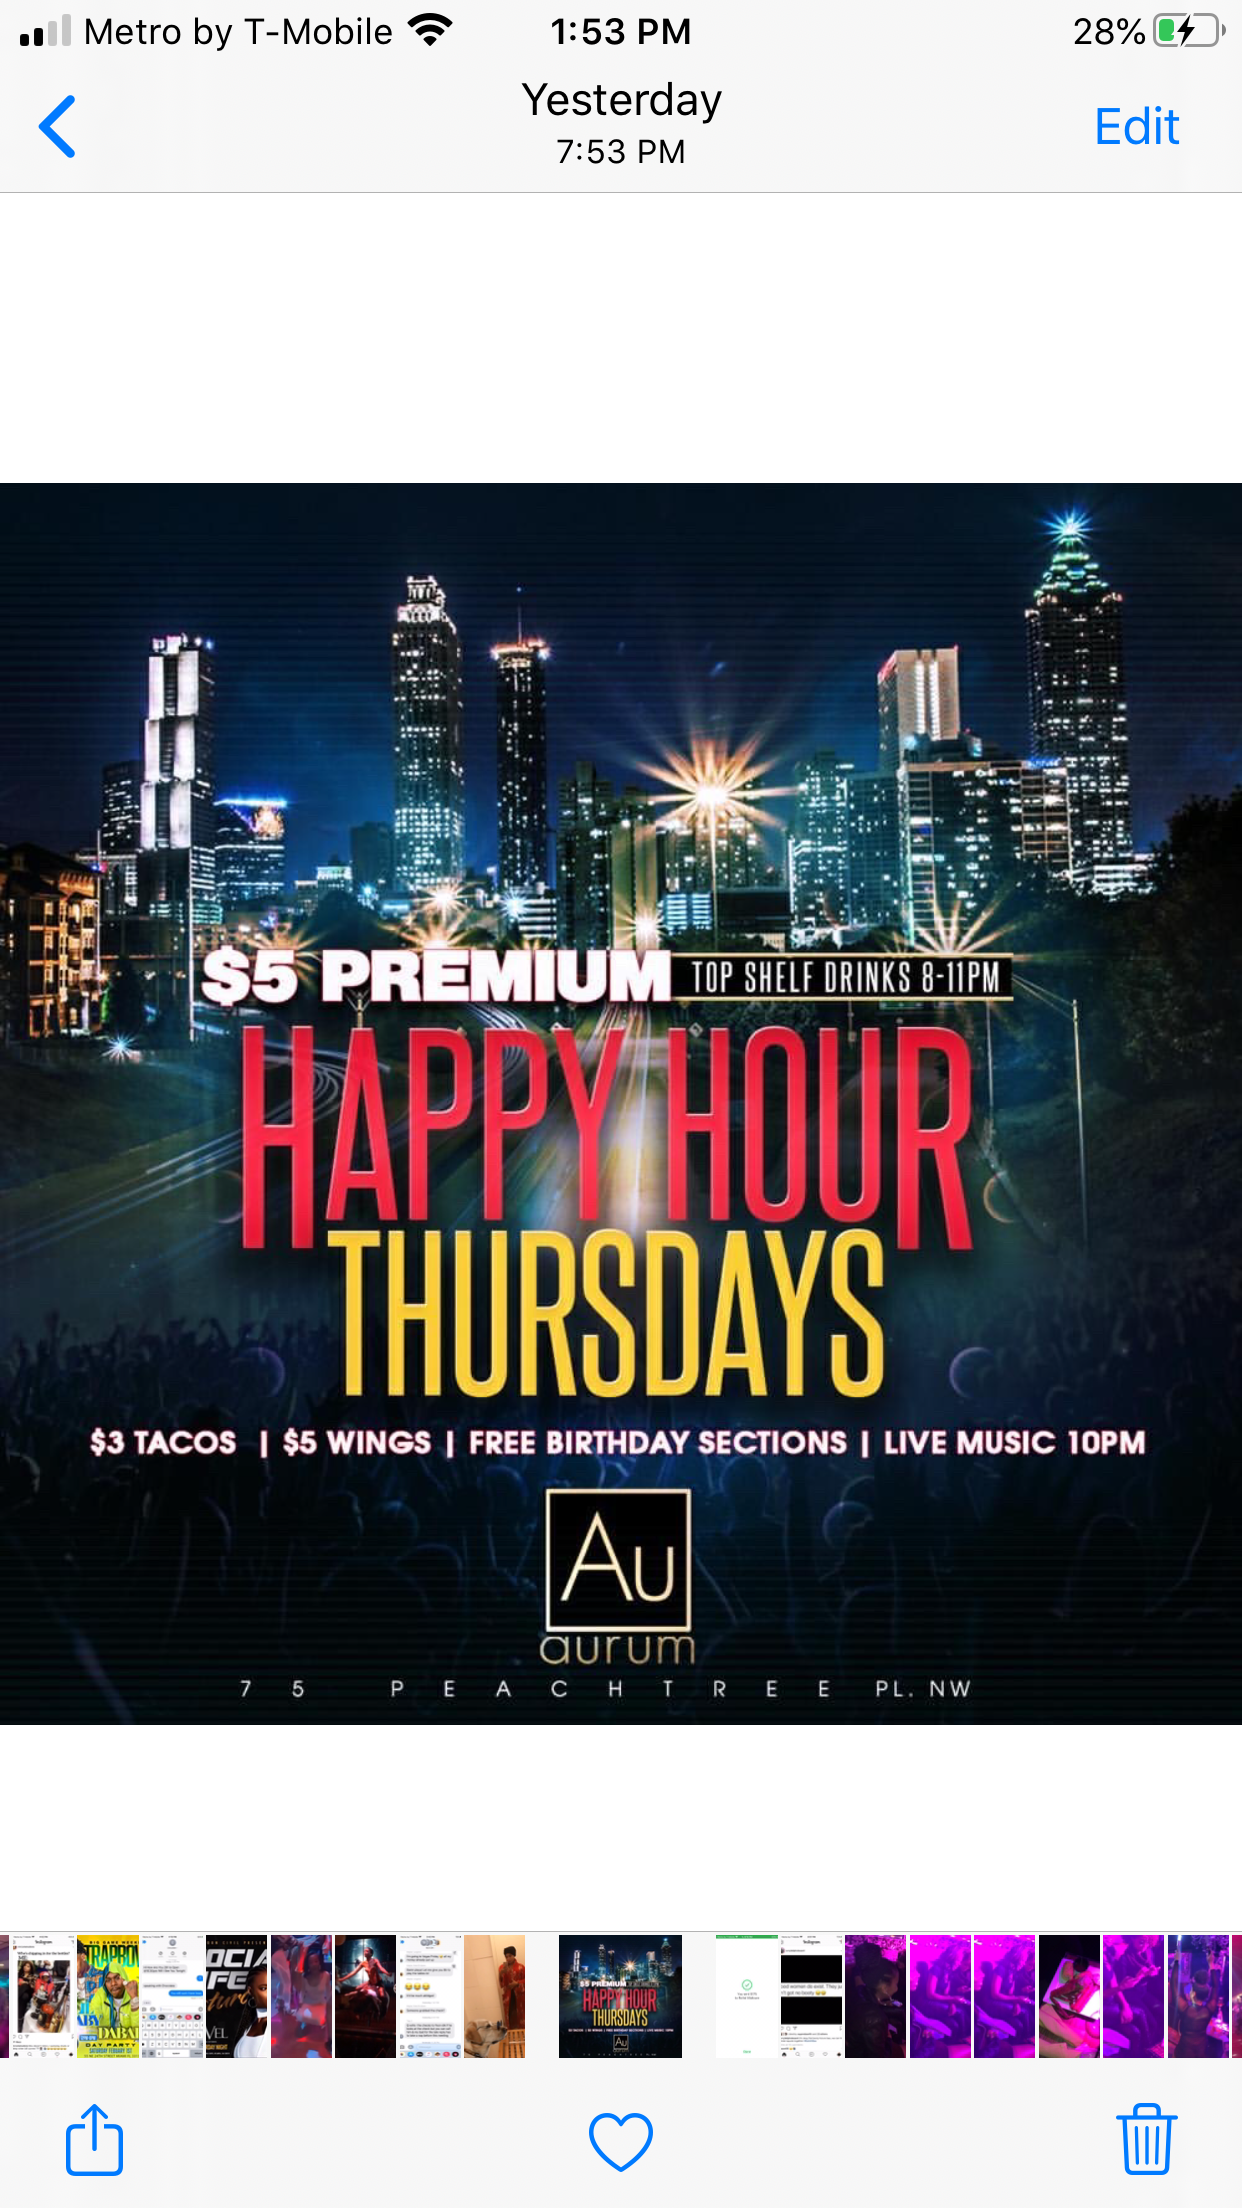 Happy Hour THURSDAYS!( 8-11)$3 tacos $5 wings $5 premium drinks LIVE BAND!